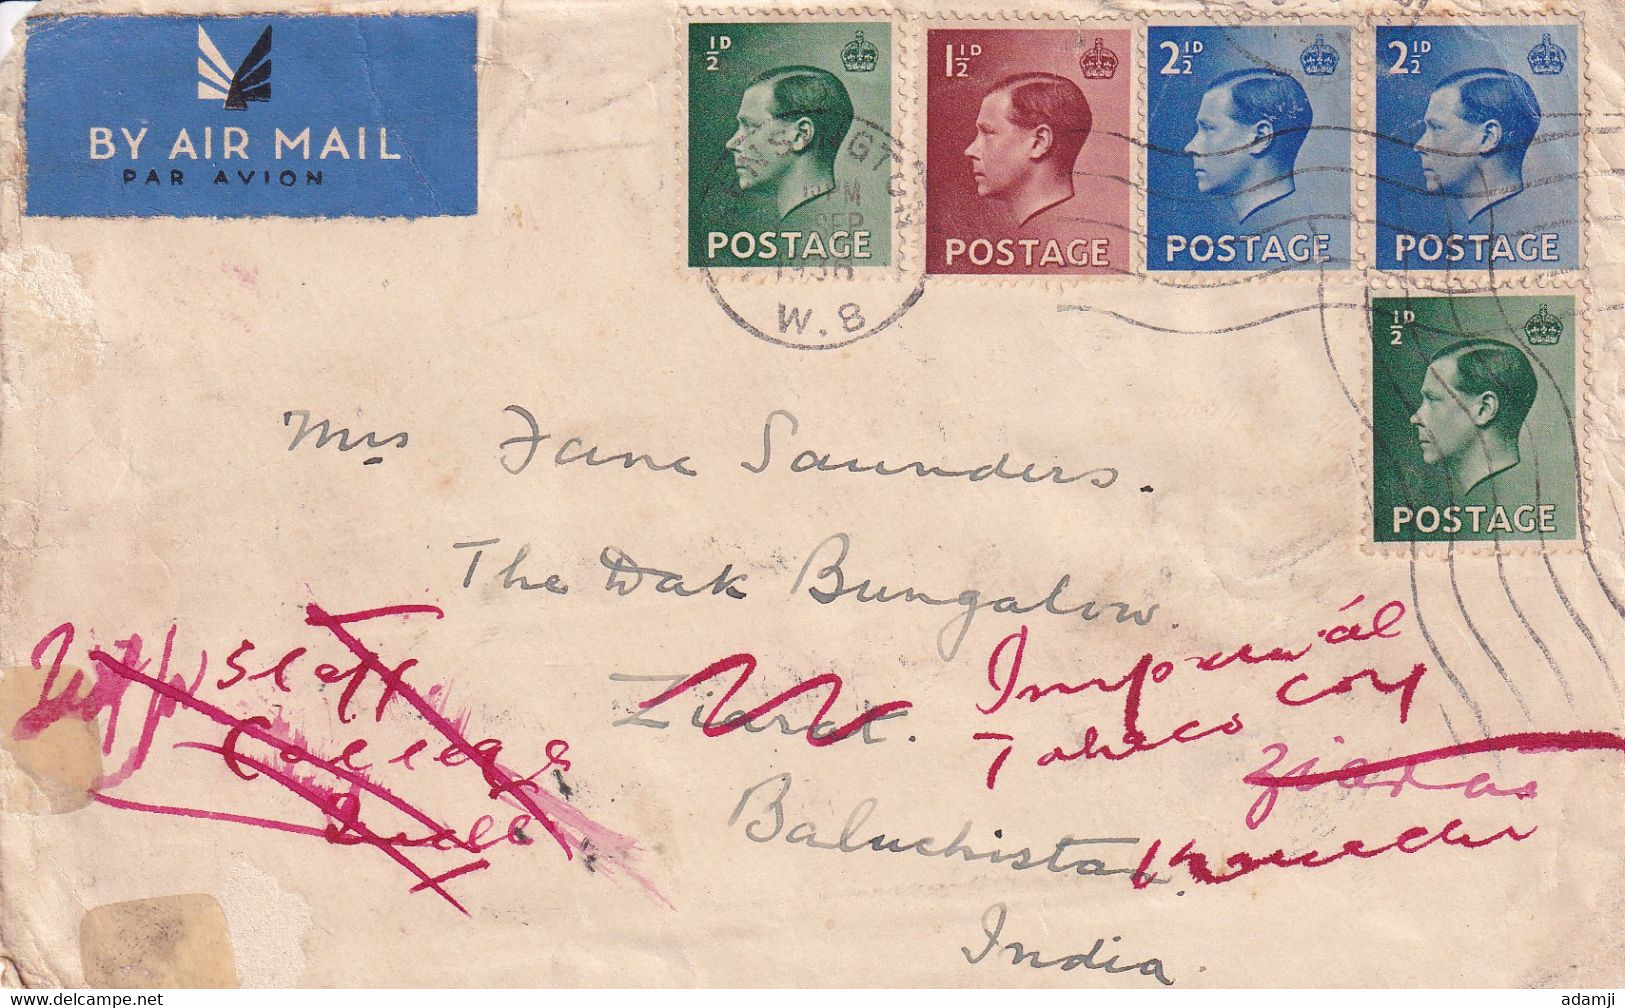 GREAT BRITAIN 1936 EDWARD VIII COVER TO INDIA (BALUCHISTAN Now PAKISTAN) VIA MULTPLE CITIES POSTMARK RARE. - Covers & Documents